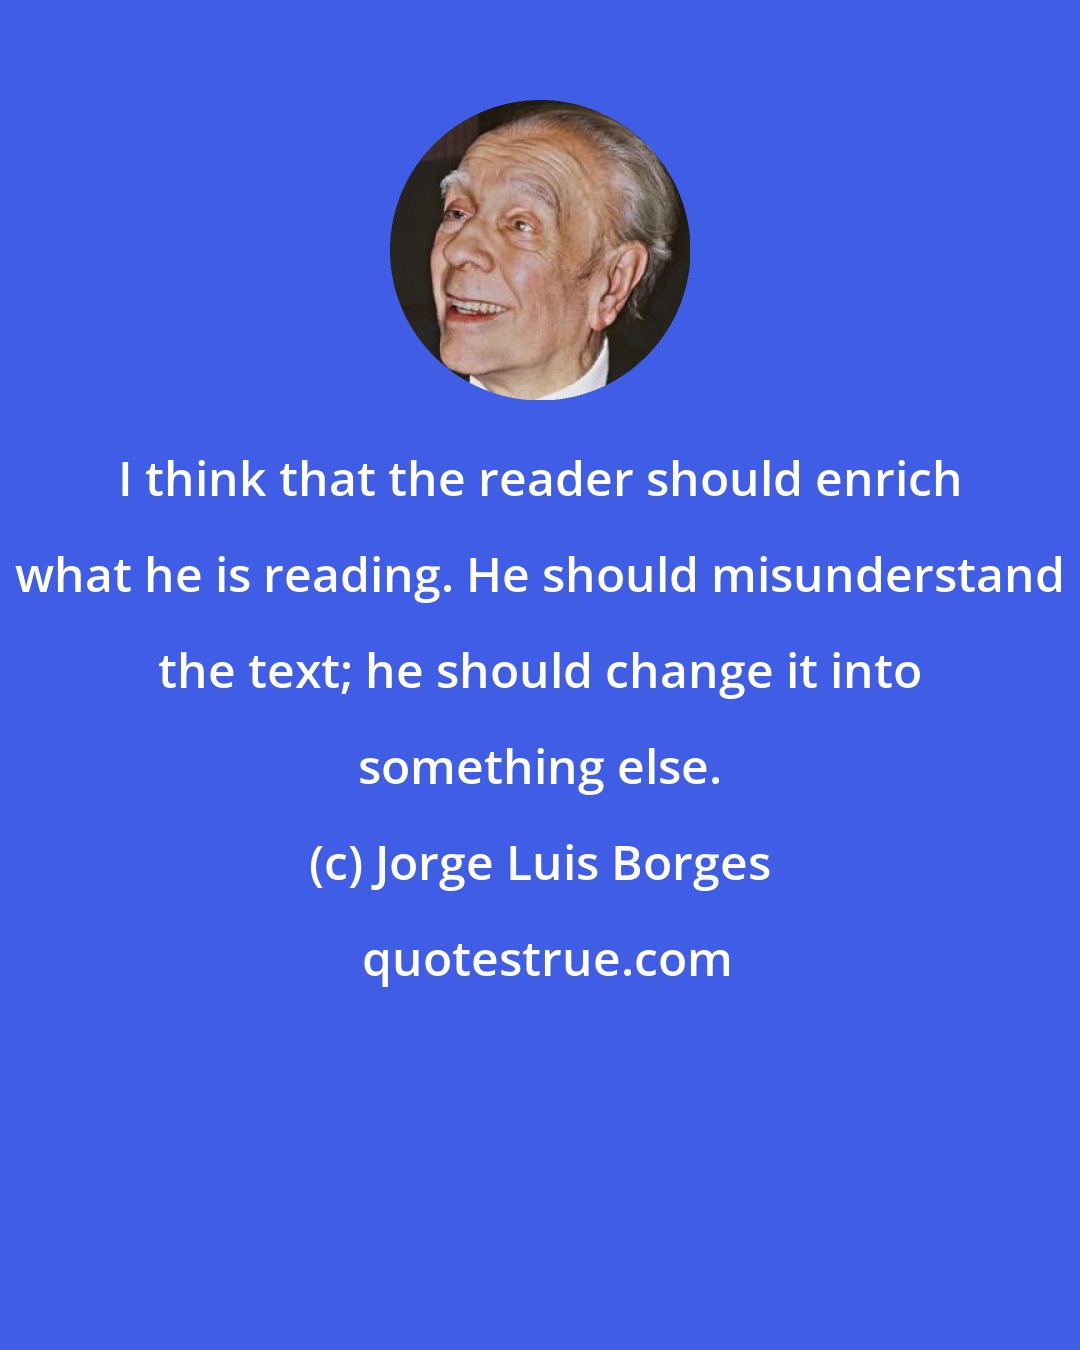 Jorge Luis Borges: I think that the reader should enrich what he is reading. He should misunderstand the text; he should change it into something else.